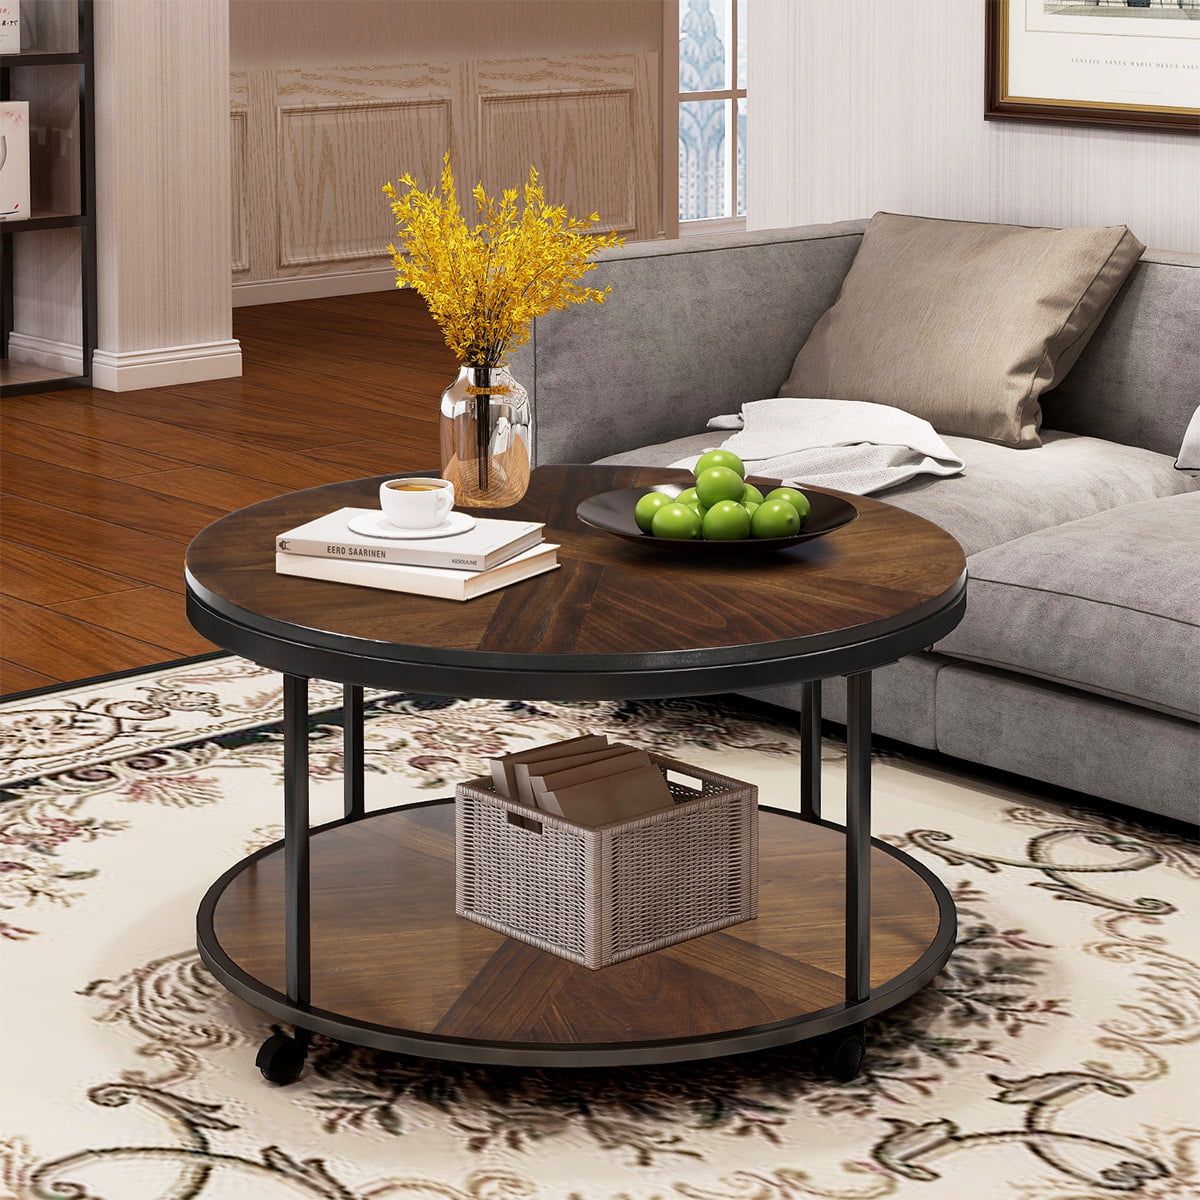 Sentern Round Coffee Table With Caster Wheels And Unique Textured Intended For Round Coffee Tables With Steel Frames (View 19 of 21)